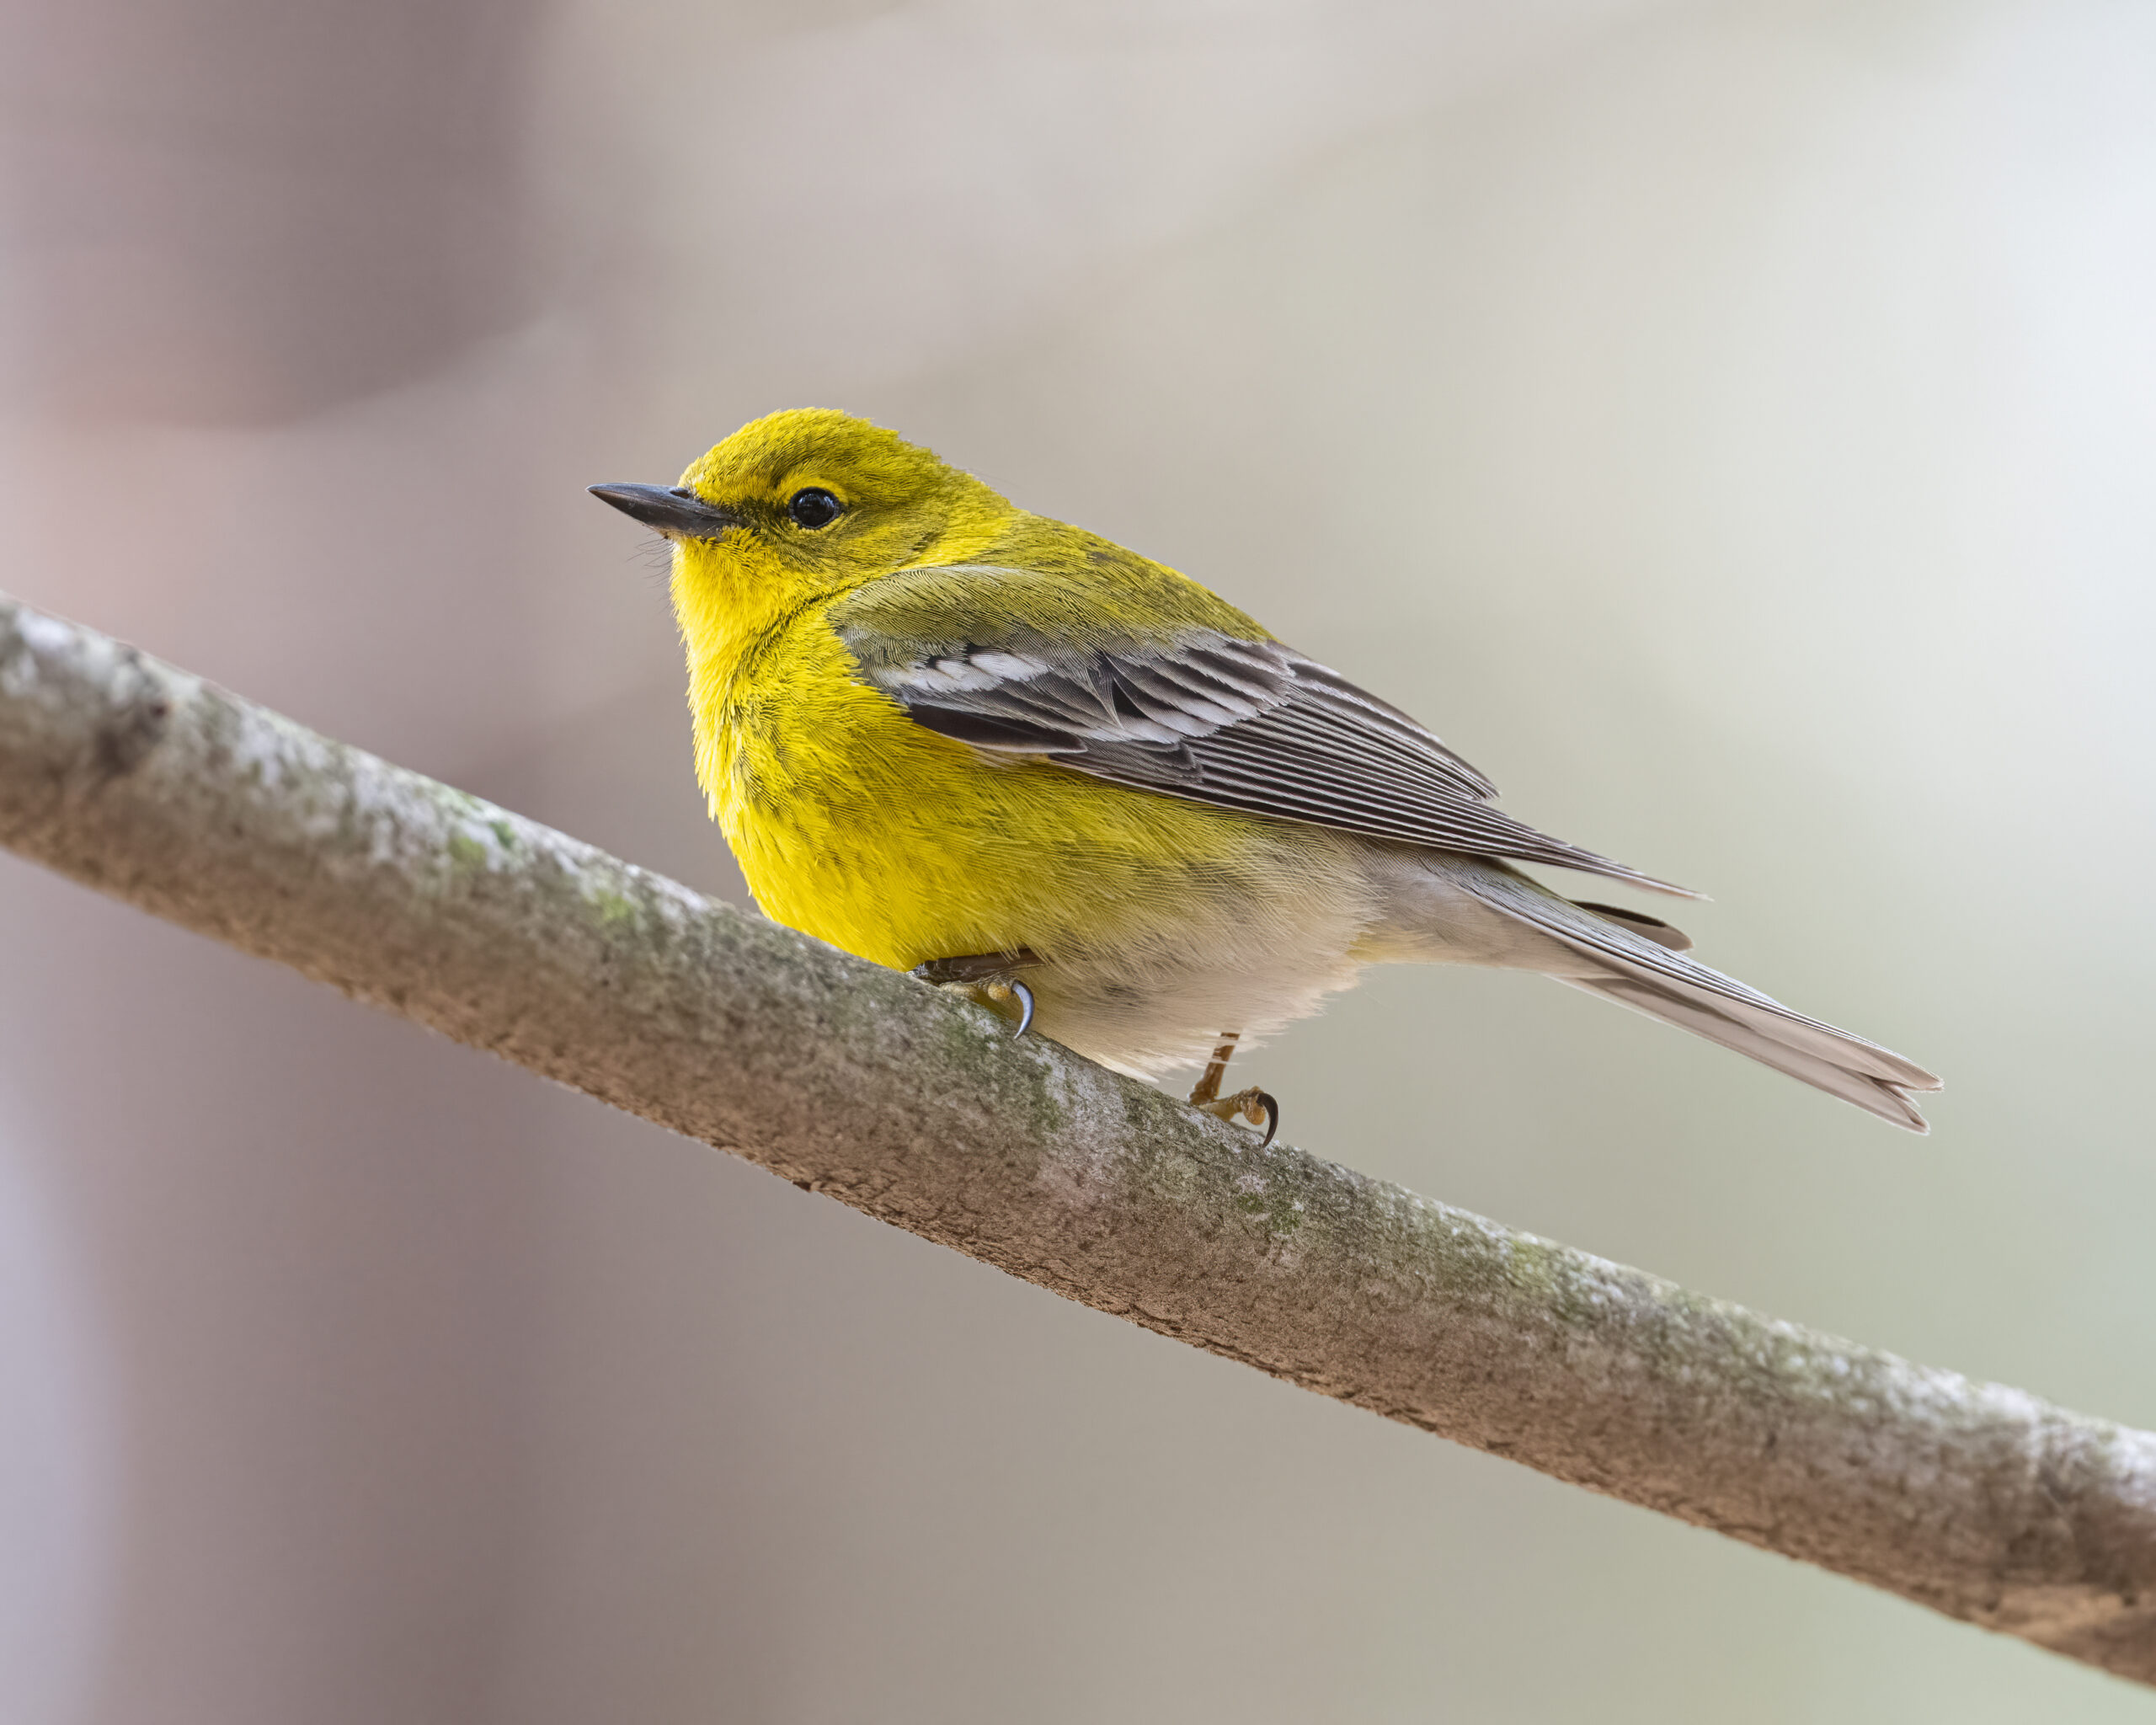 Pining for the pine warbler